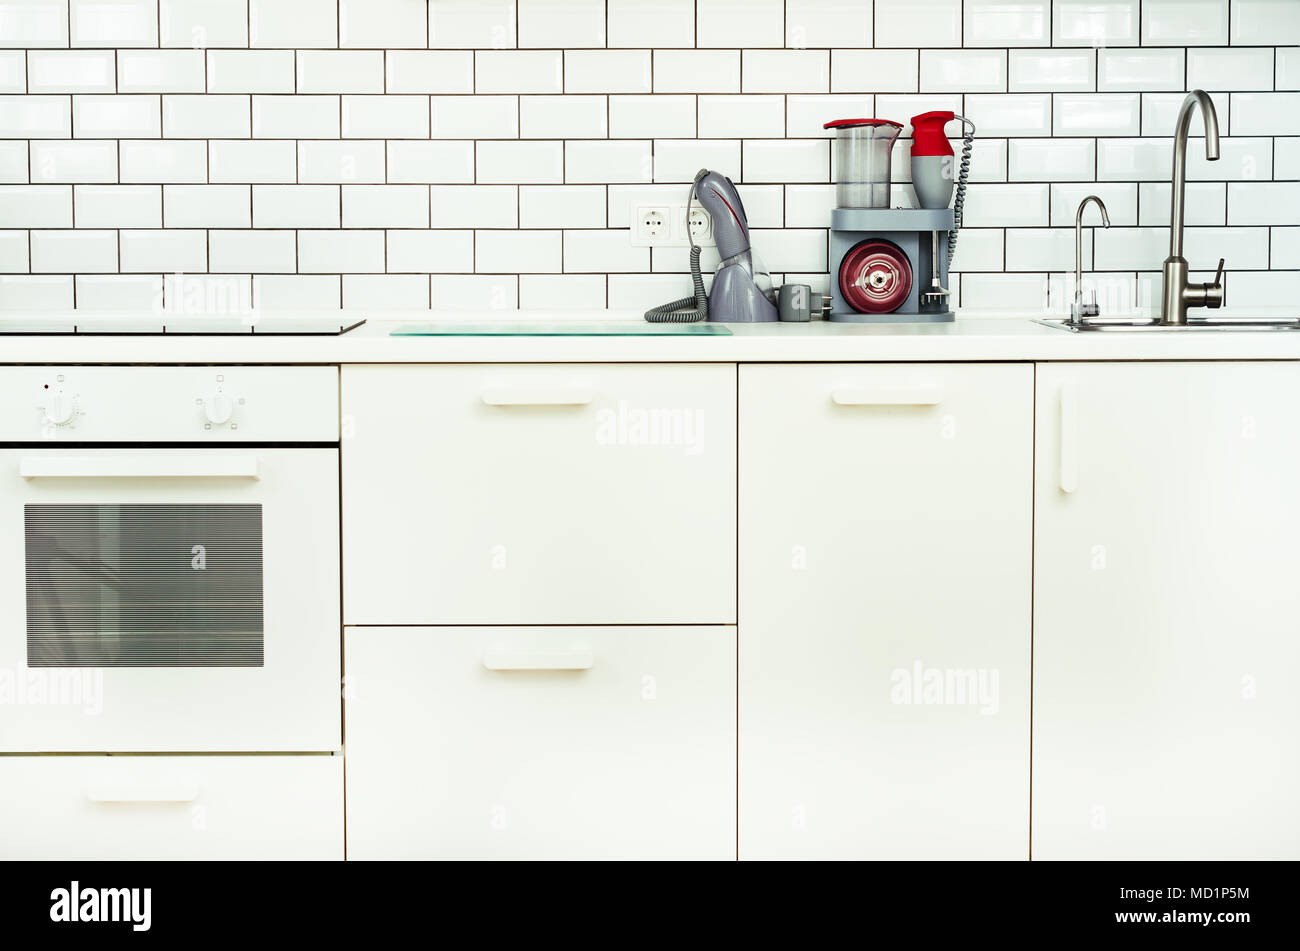 Household Appliances in Modern Kitchen Stock Photo - Image of wall